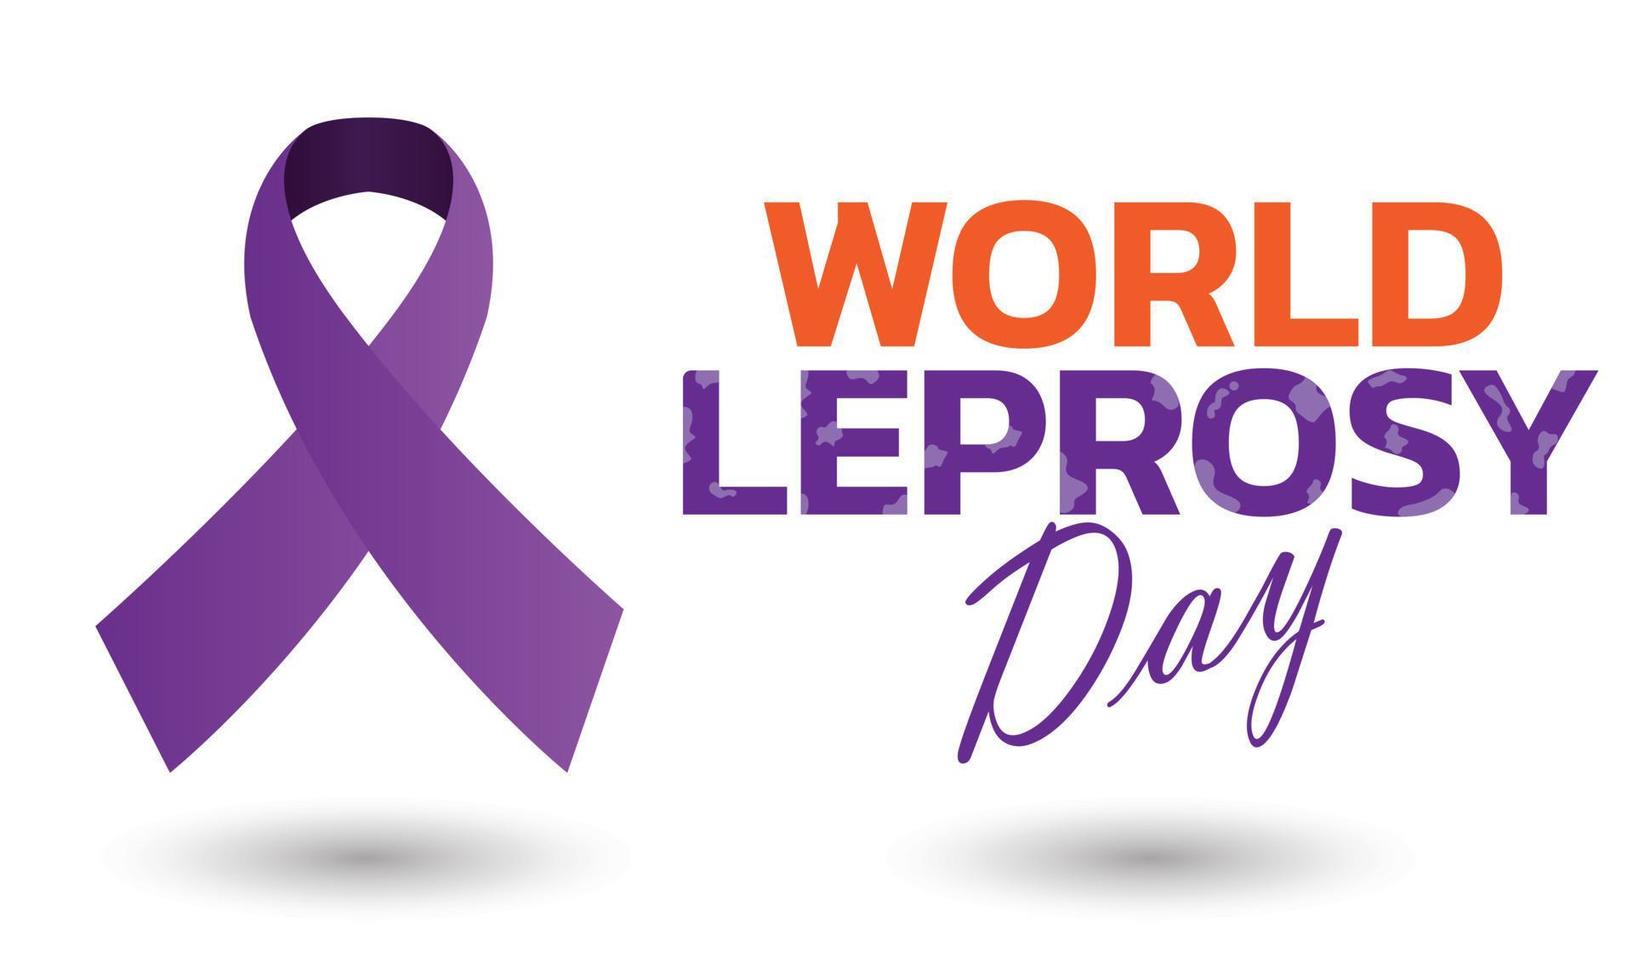 Vector illustration on the theme of World Leprosy Day